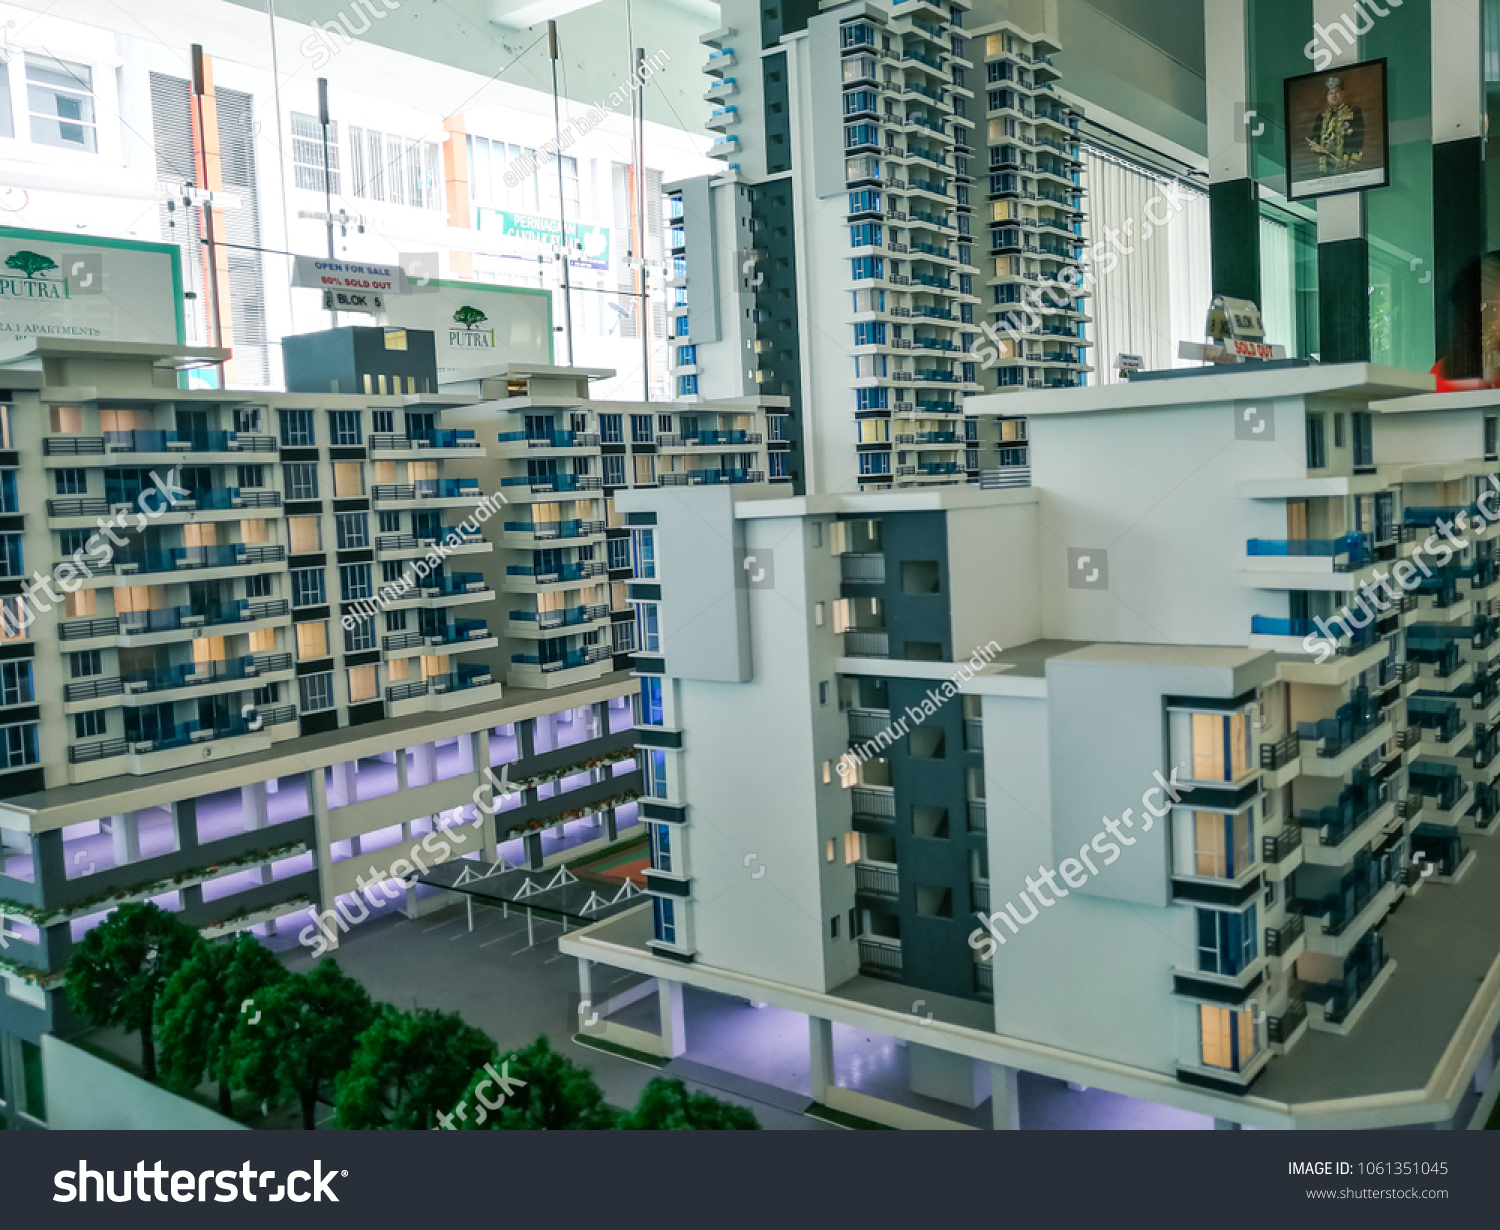 Selangor Malaysia March 25 2018 Affordable Stock Photo 1061351045 Shutterstock